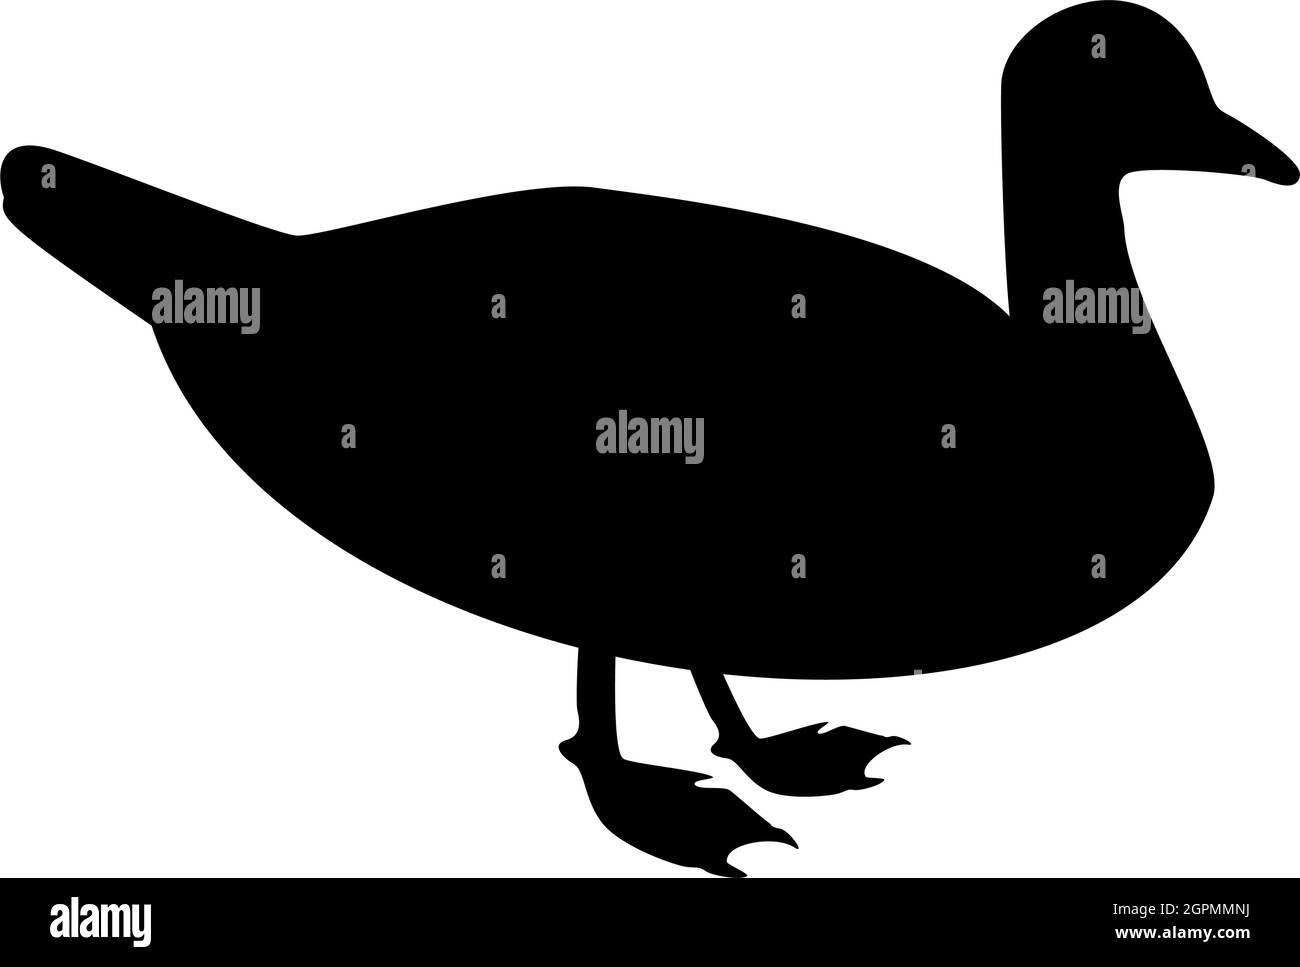 Silhouette duck male mallard bird waterbird waterfowl poultry fowl canard black color vector illustration flat style image Stock Vector